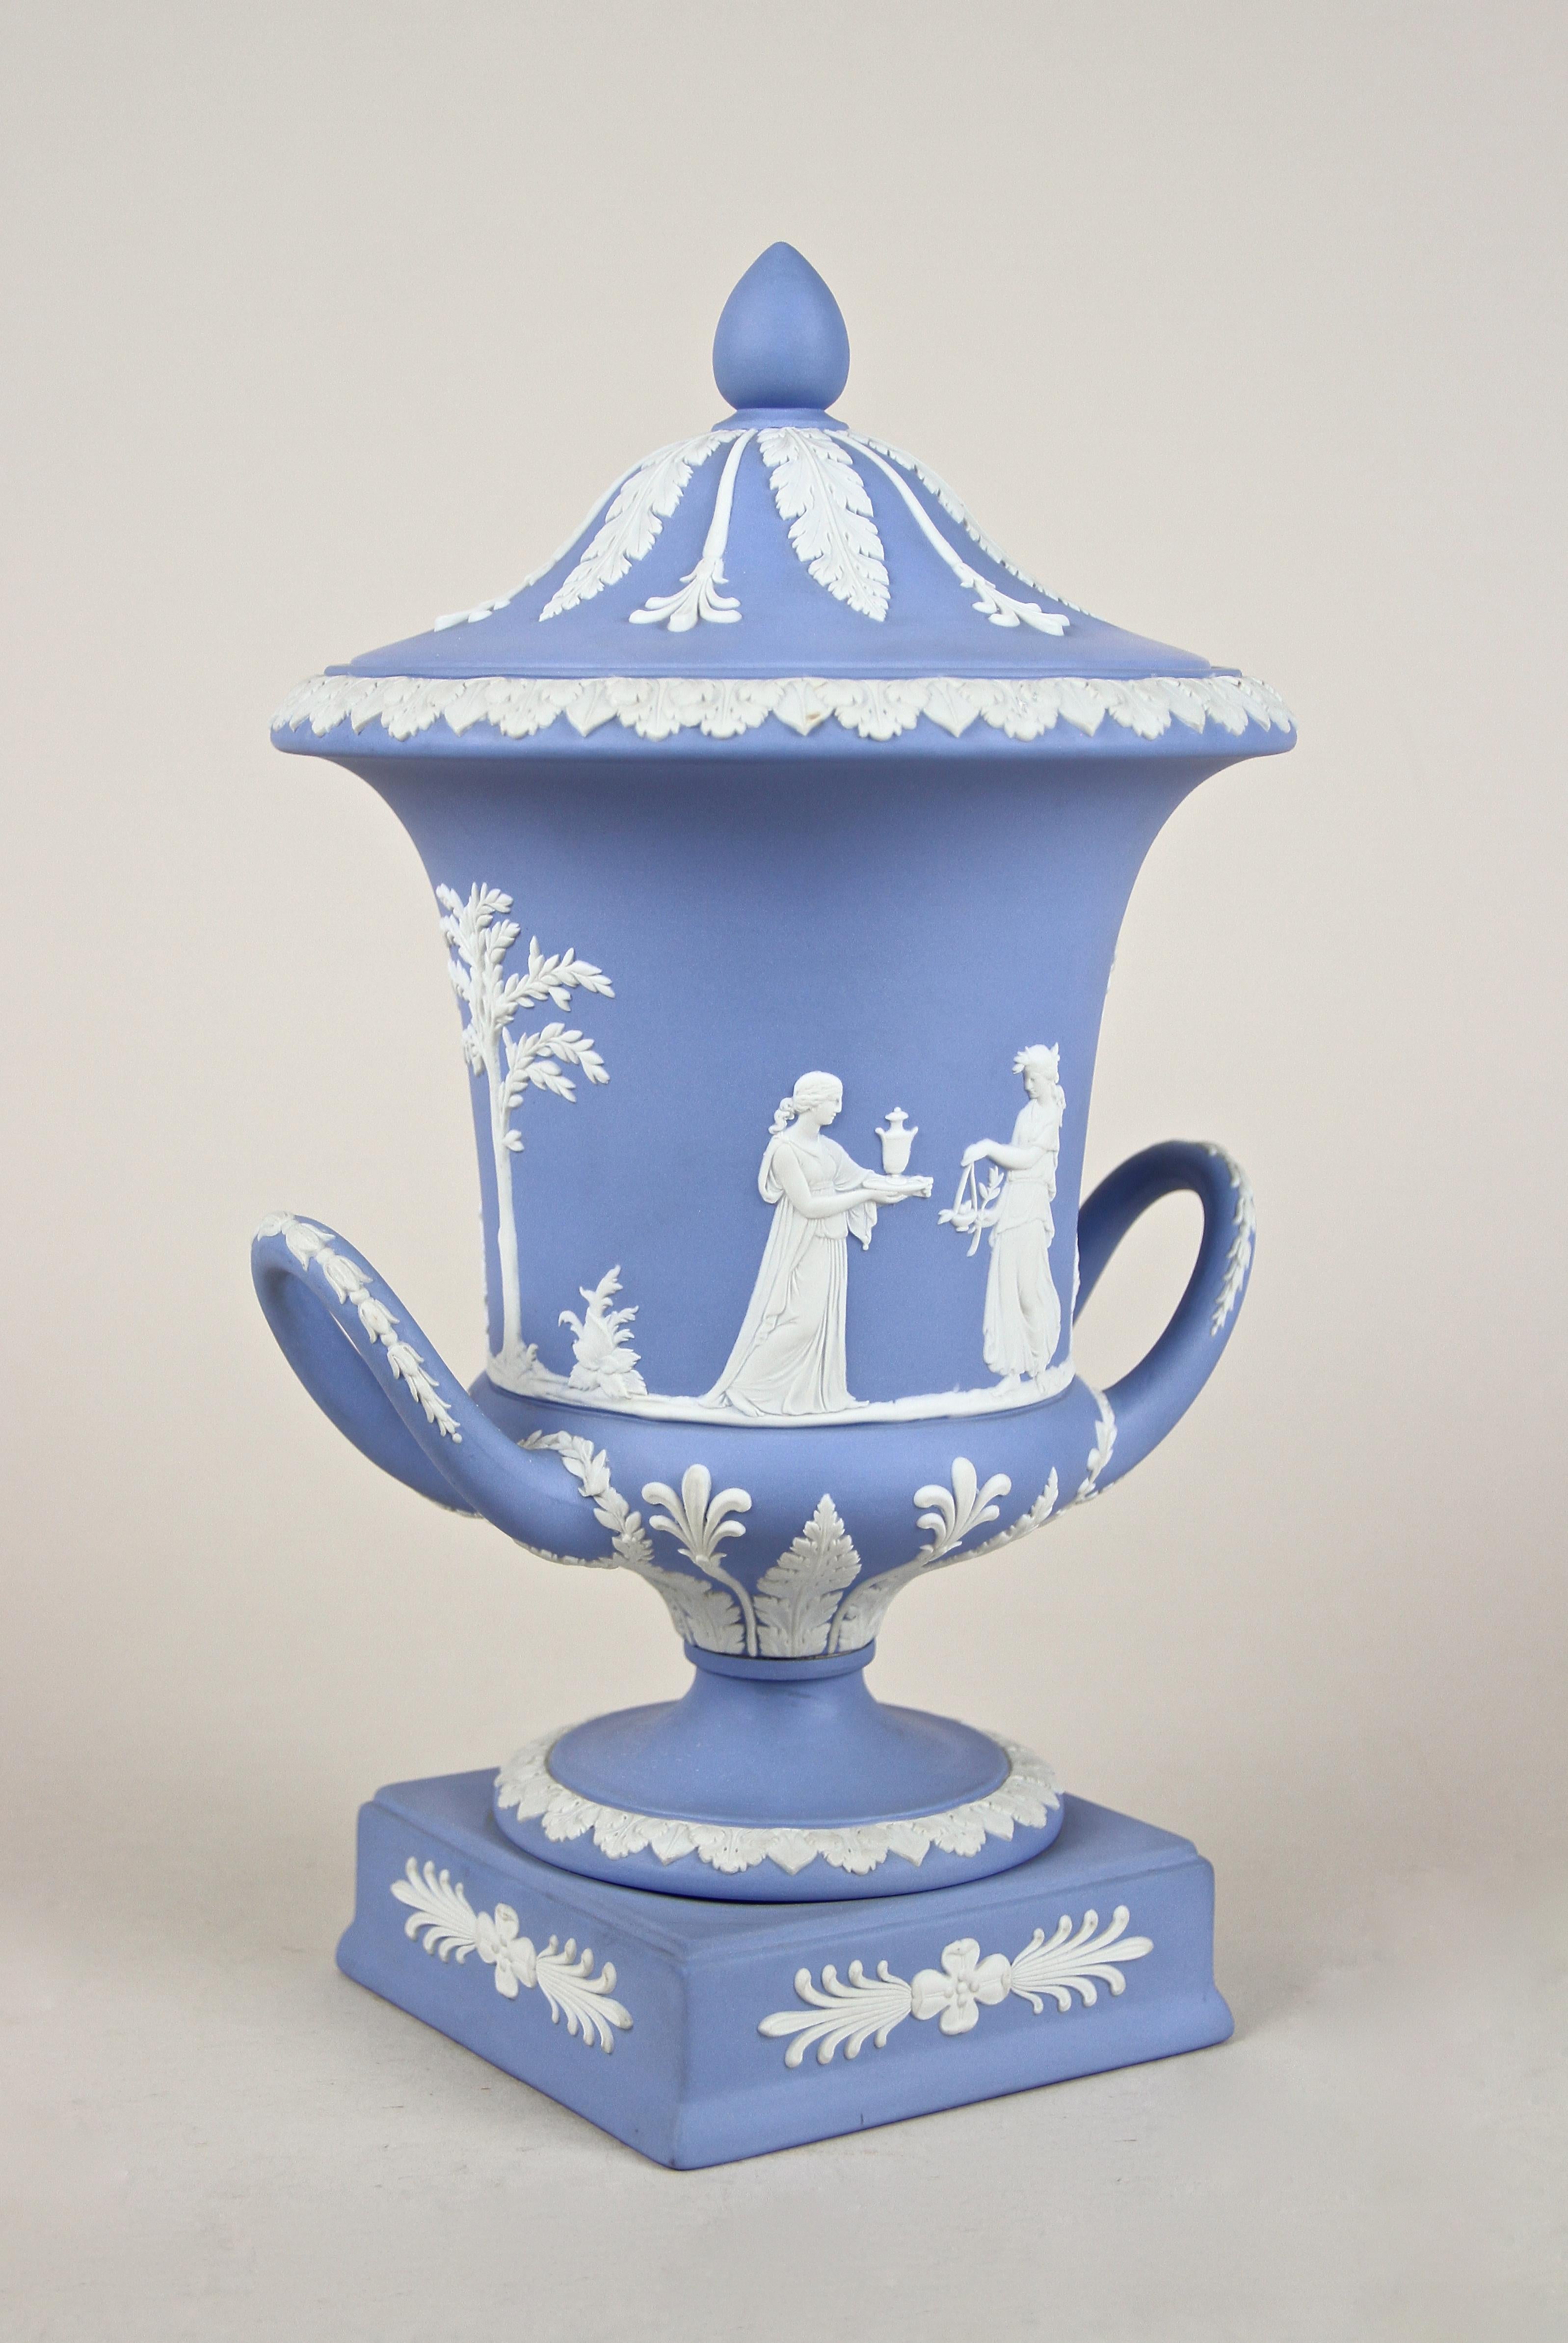 Lovely lidded pale blue Jasperware urn vase from the famous English company of Wedgwood in breathtaking condition. Made in the early 20th century around 1910, this stunning vase comes straight out from the vitrine of a private collector and is in